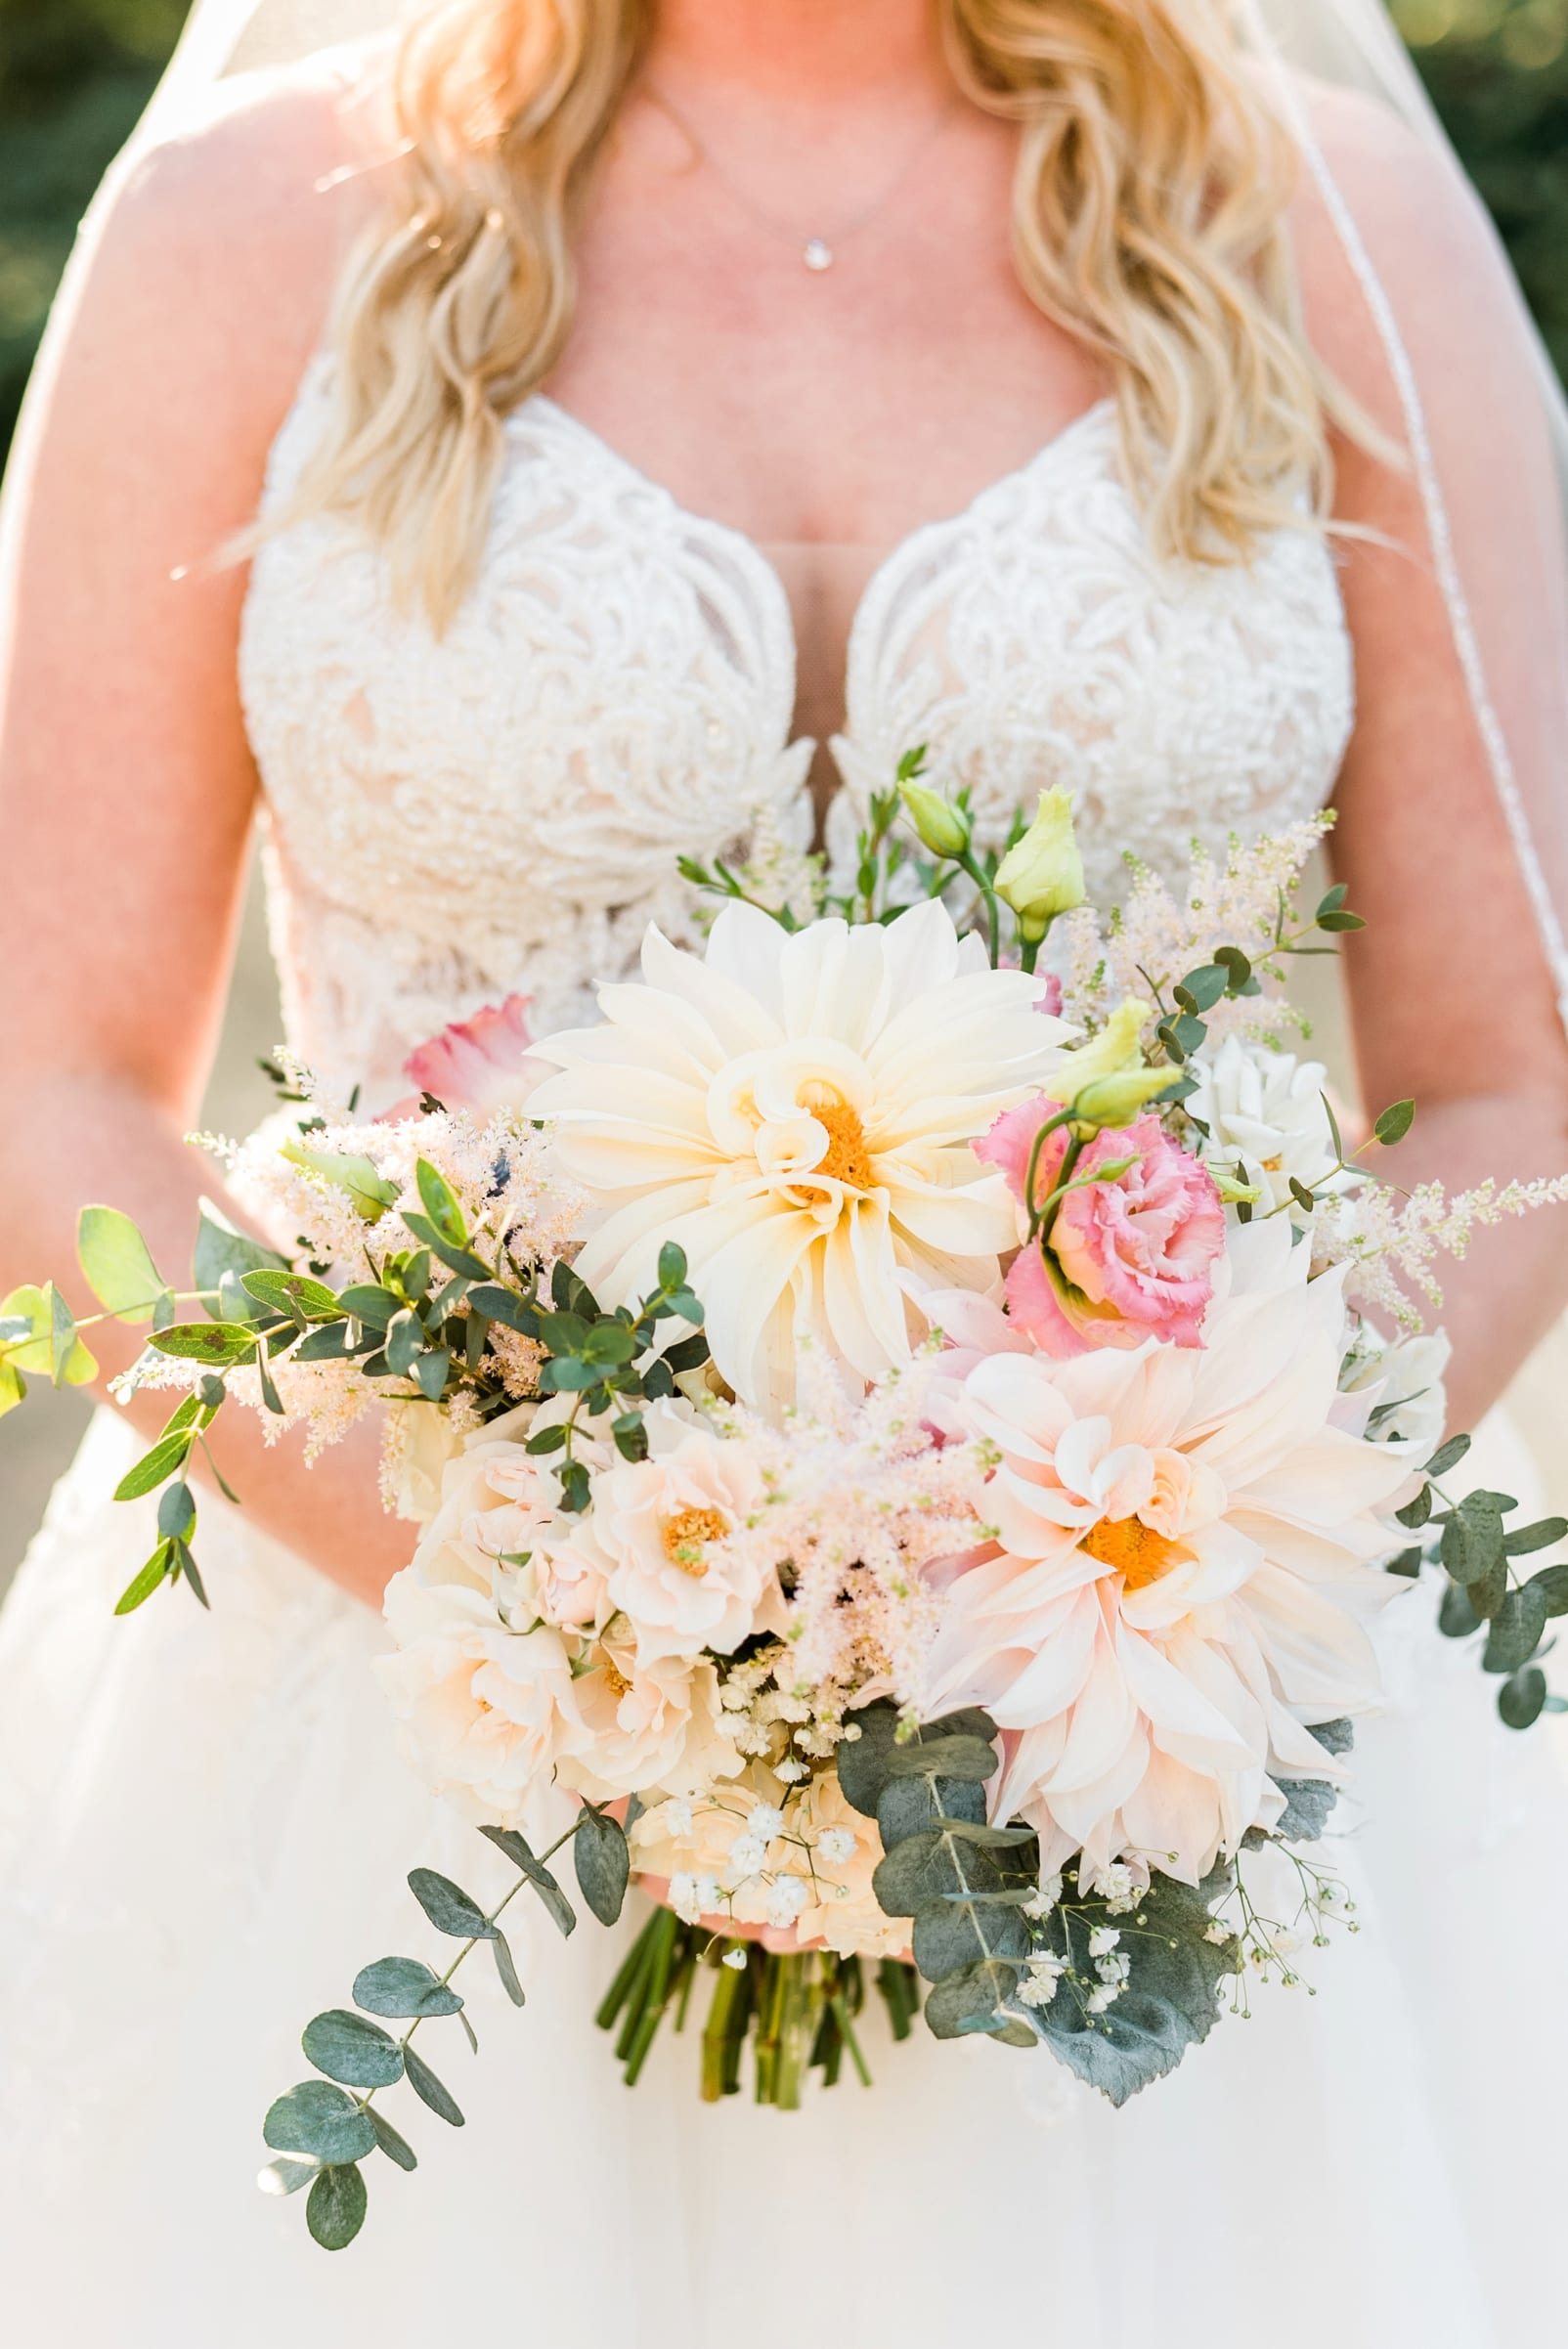 Flowers on Broad Street bridal bouquet with white and cream flowers and pops of light pink flowers photo